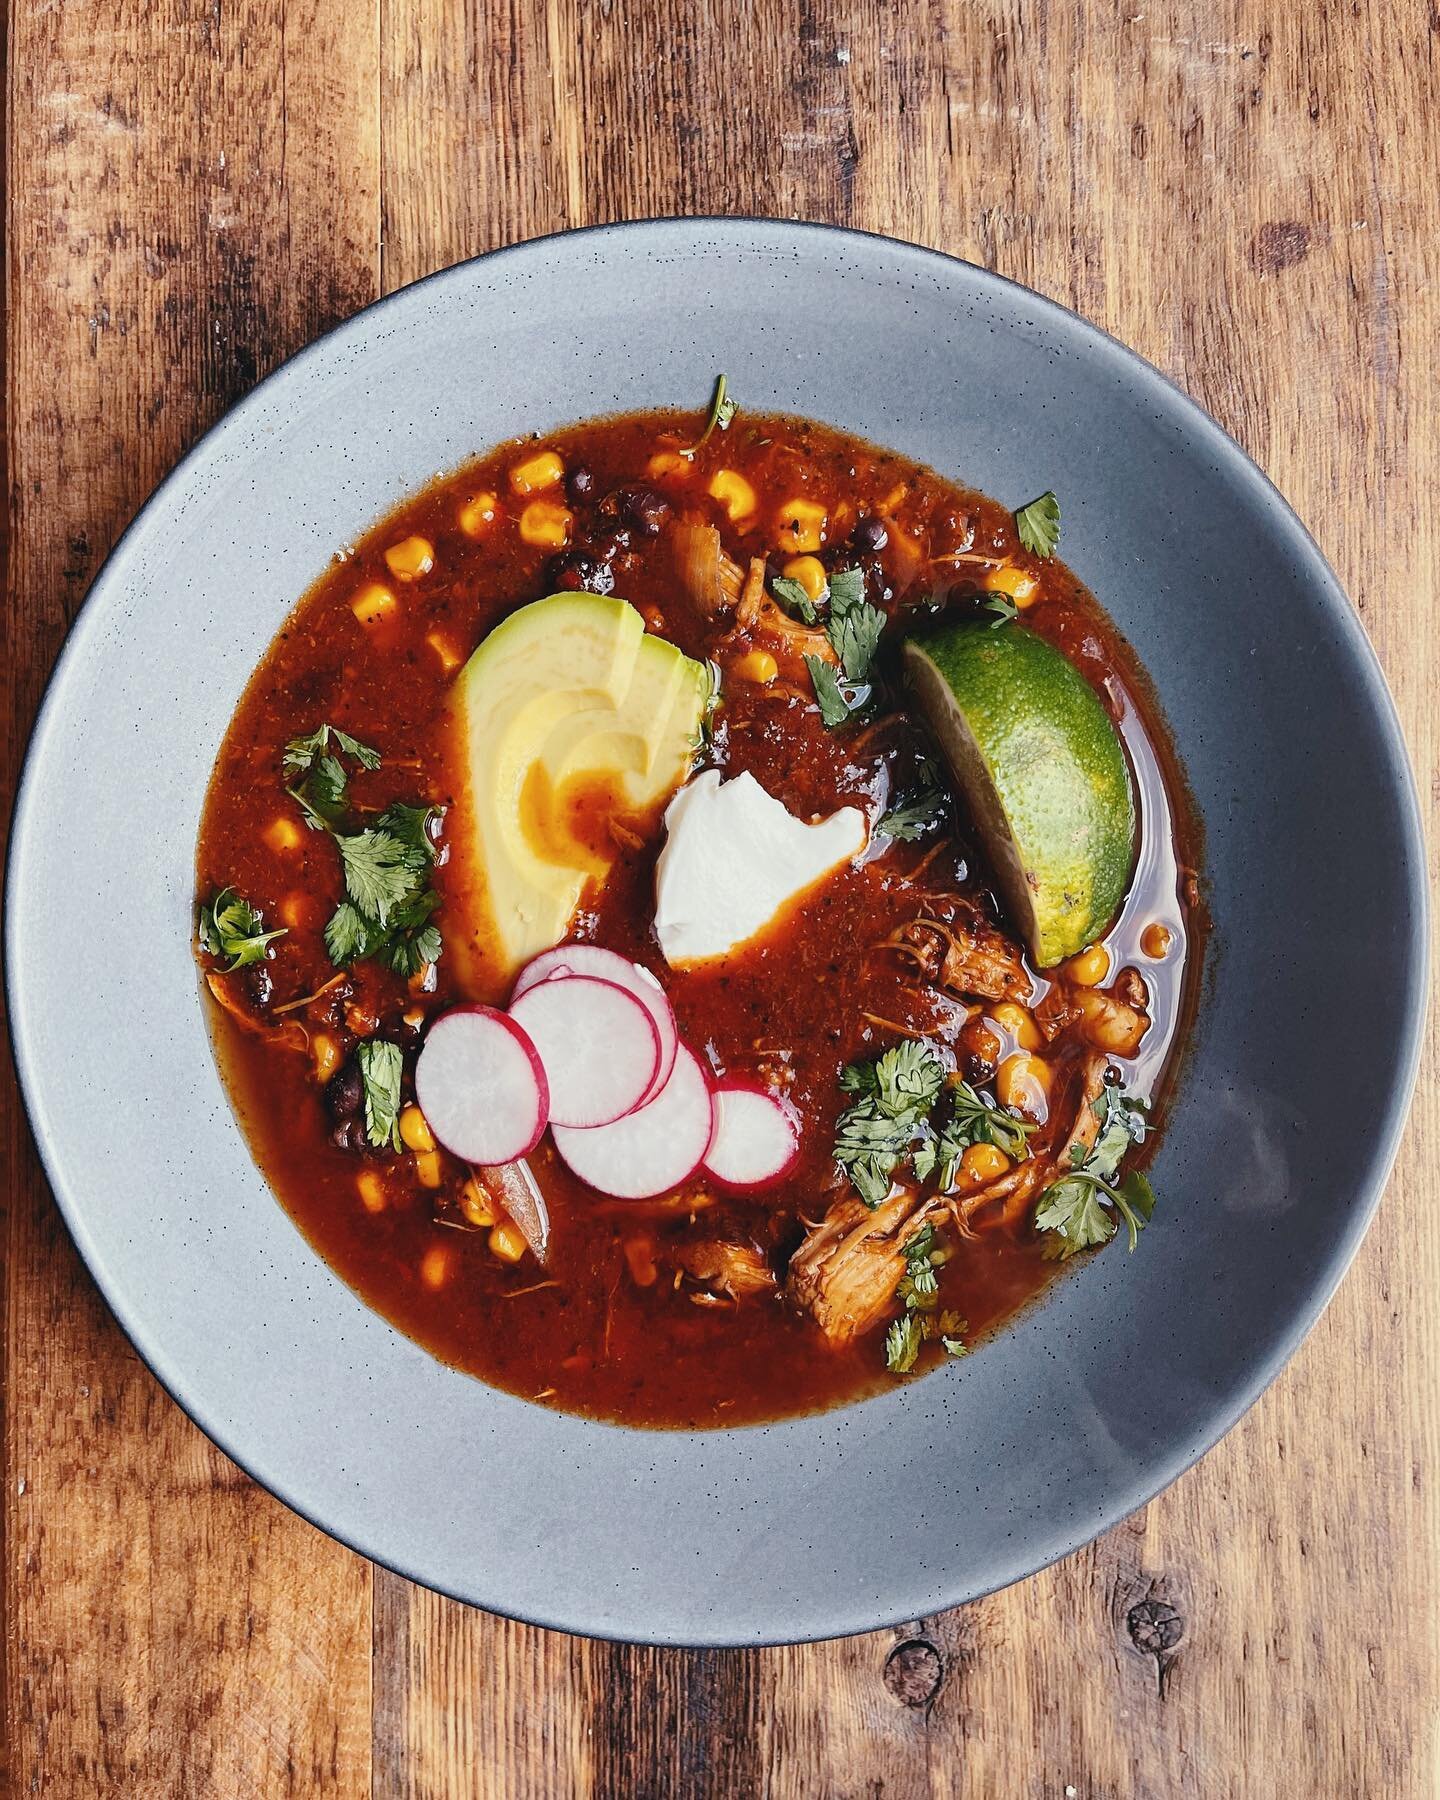 chicken tortilla soup! (even tho it&rsquo;s hot outside, i was craving it!)⁣
⁣
i learned how to make authentic mexican pozole while i was there &amp; i adapted that recipe for chicken tortilla soup. it was so damn good, there&rsquo;s barely any left!